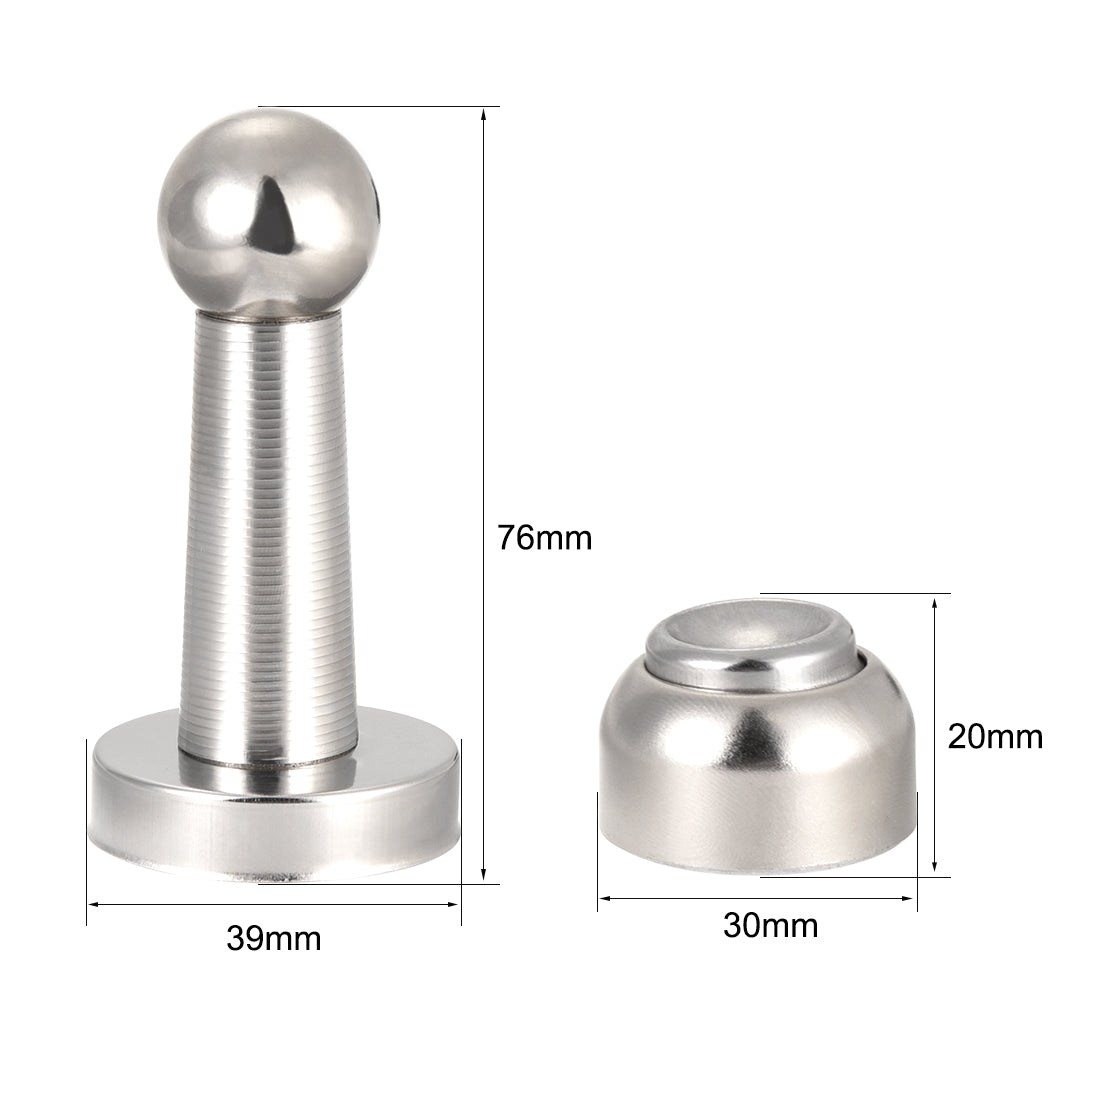 uxcell Uxcell Stainless Steel Door Magnetic Catch Holder Stopper Doorstop Polished Finish Silver Tone 3pcs